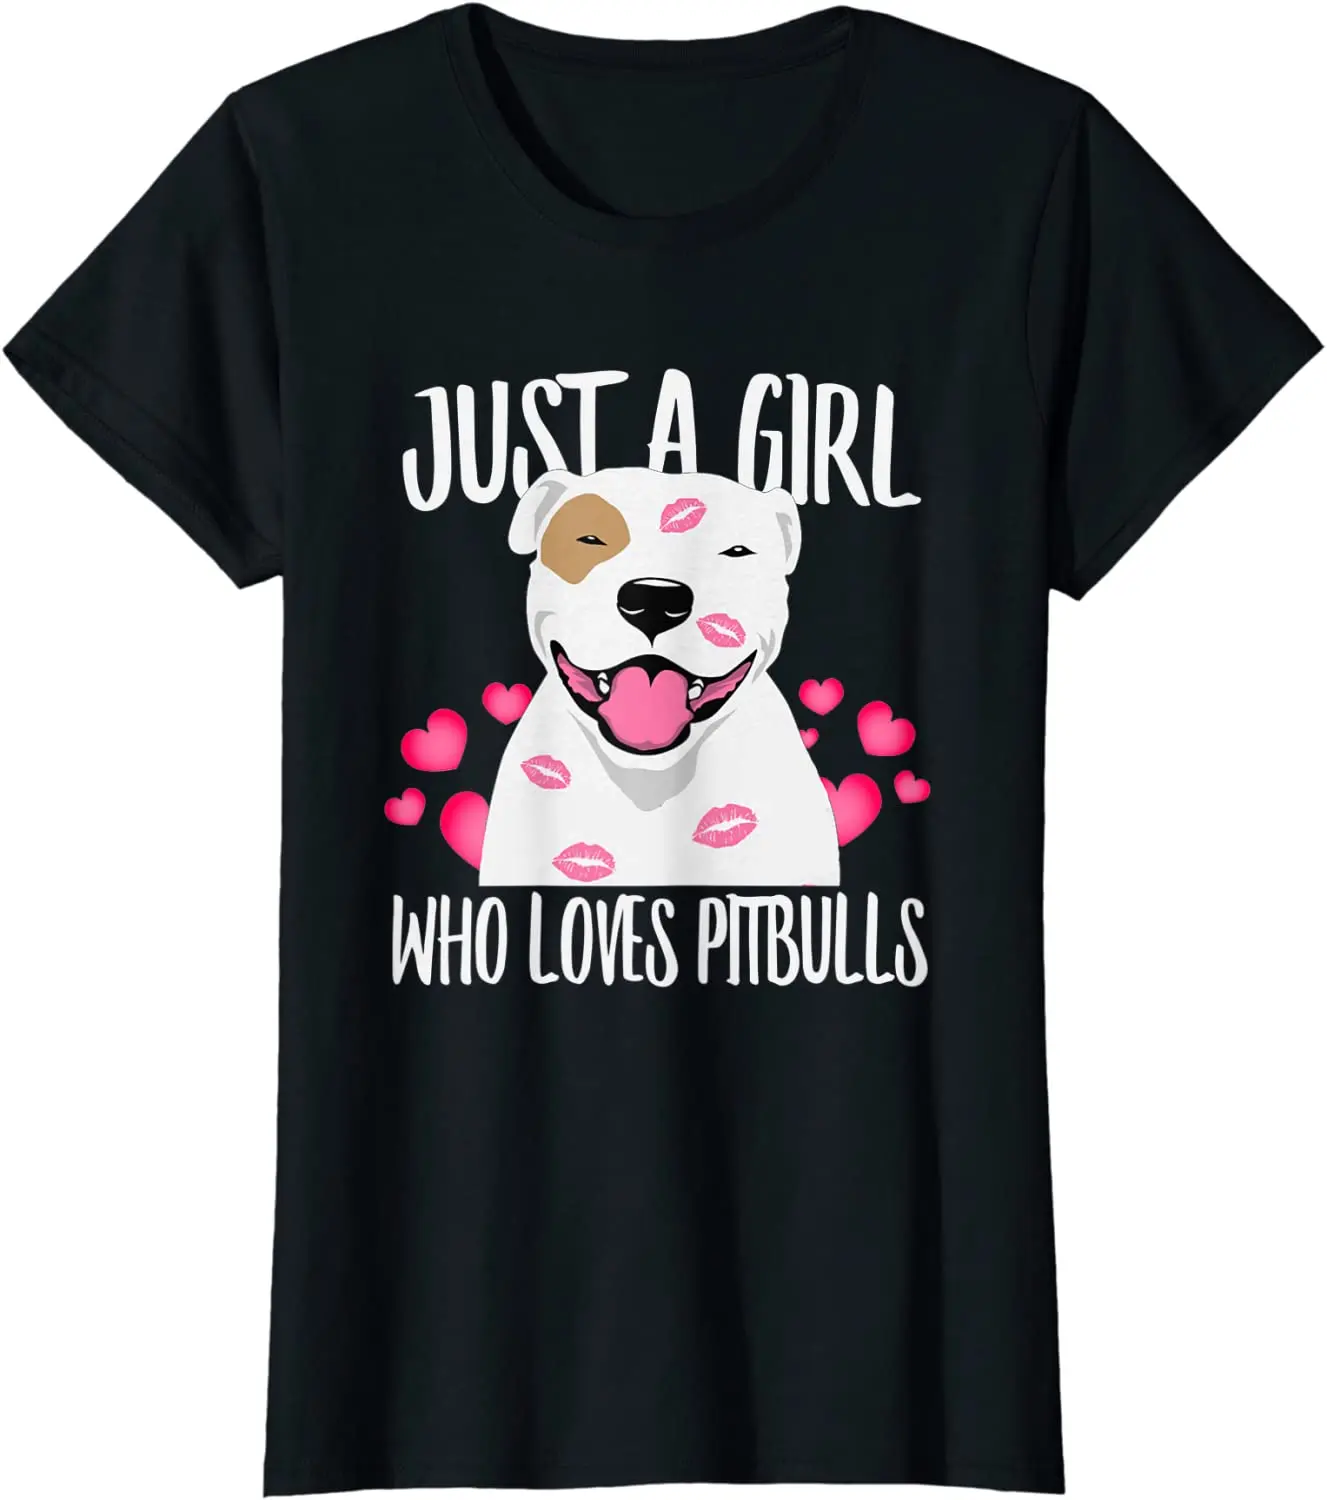 A Girl Who Loves Pit-bulls, Dog Love-r Dad Mom Boy Girl T-Shirt Normal Tees for Men Top T-shirts Customized Oversized